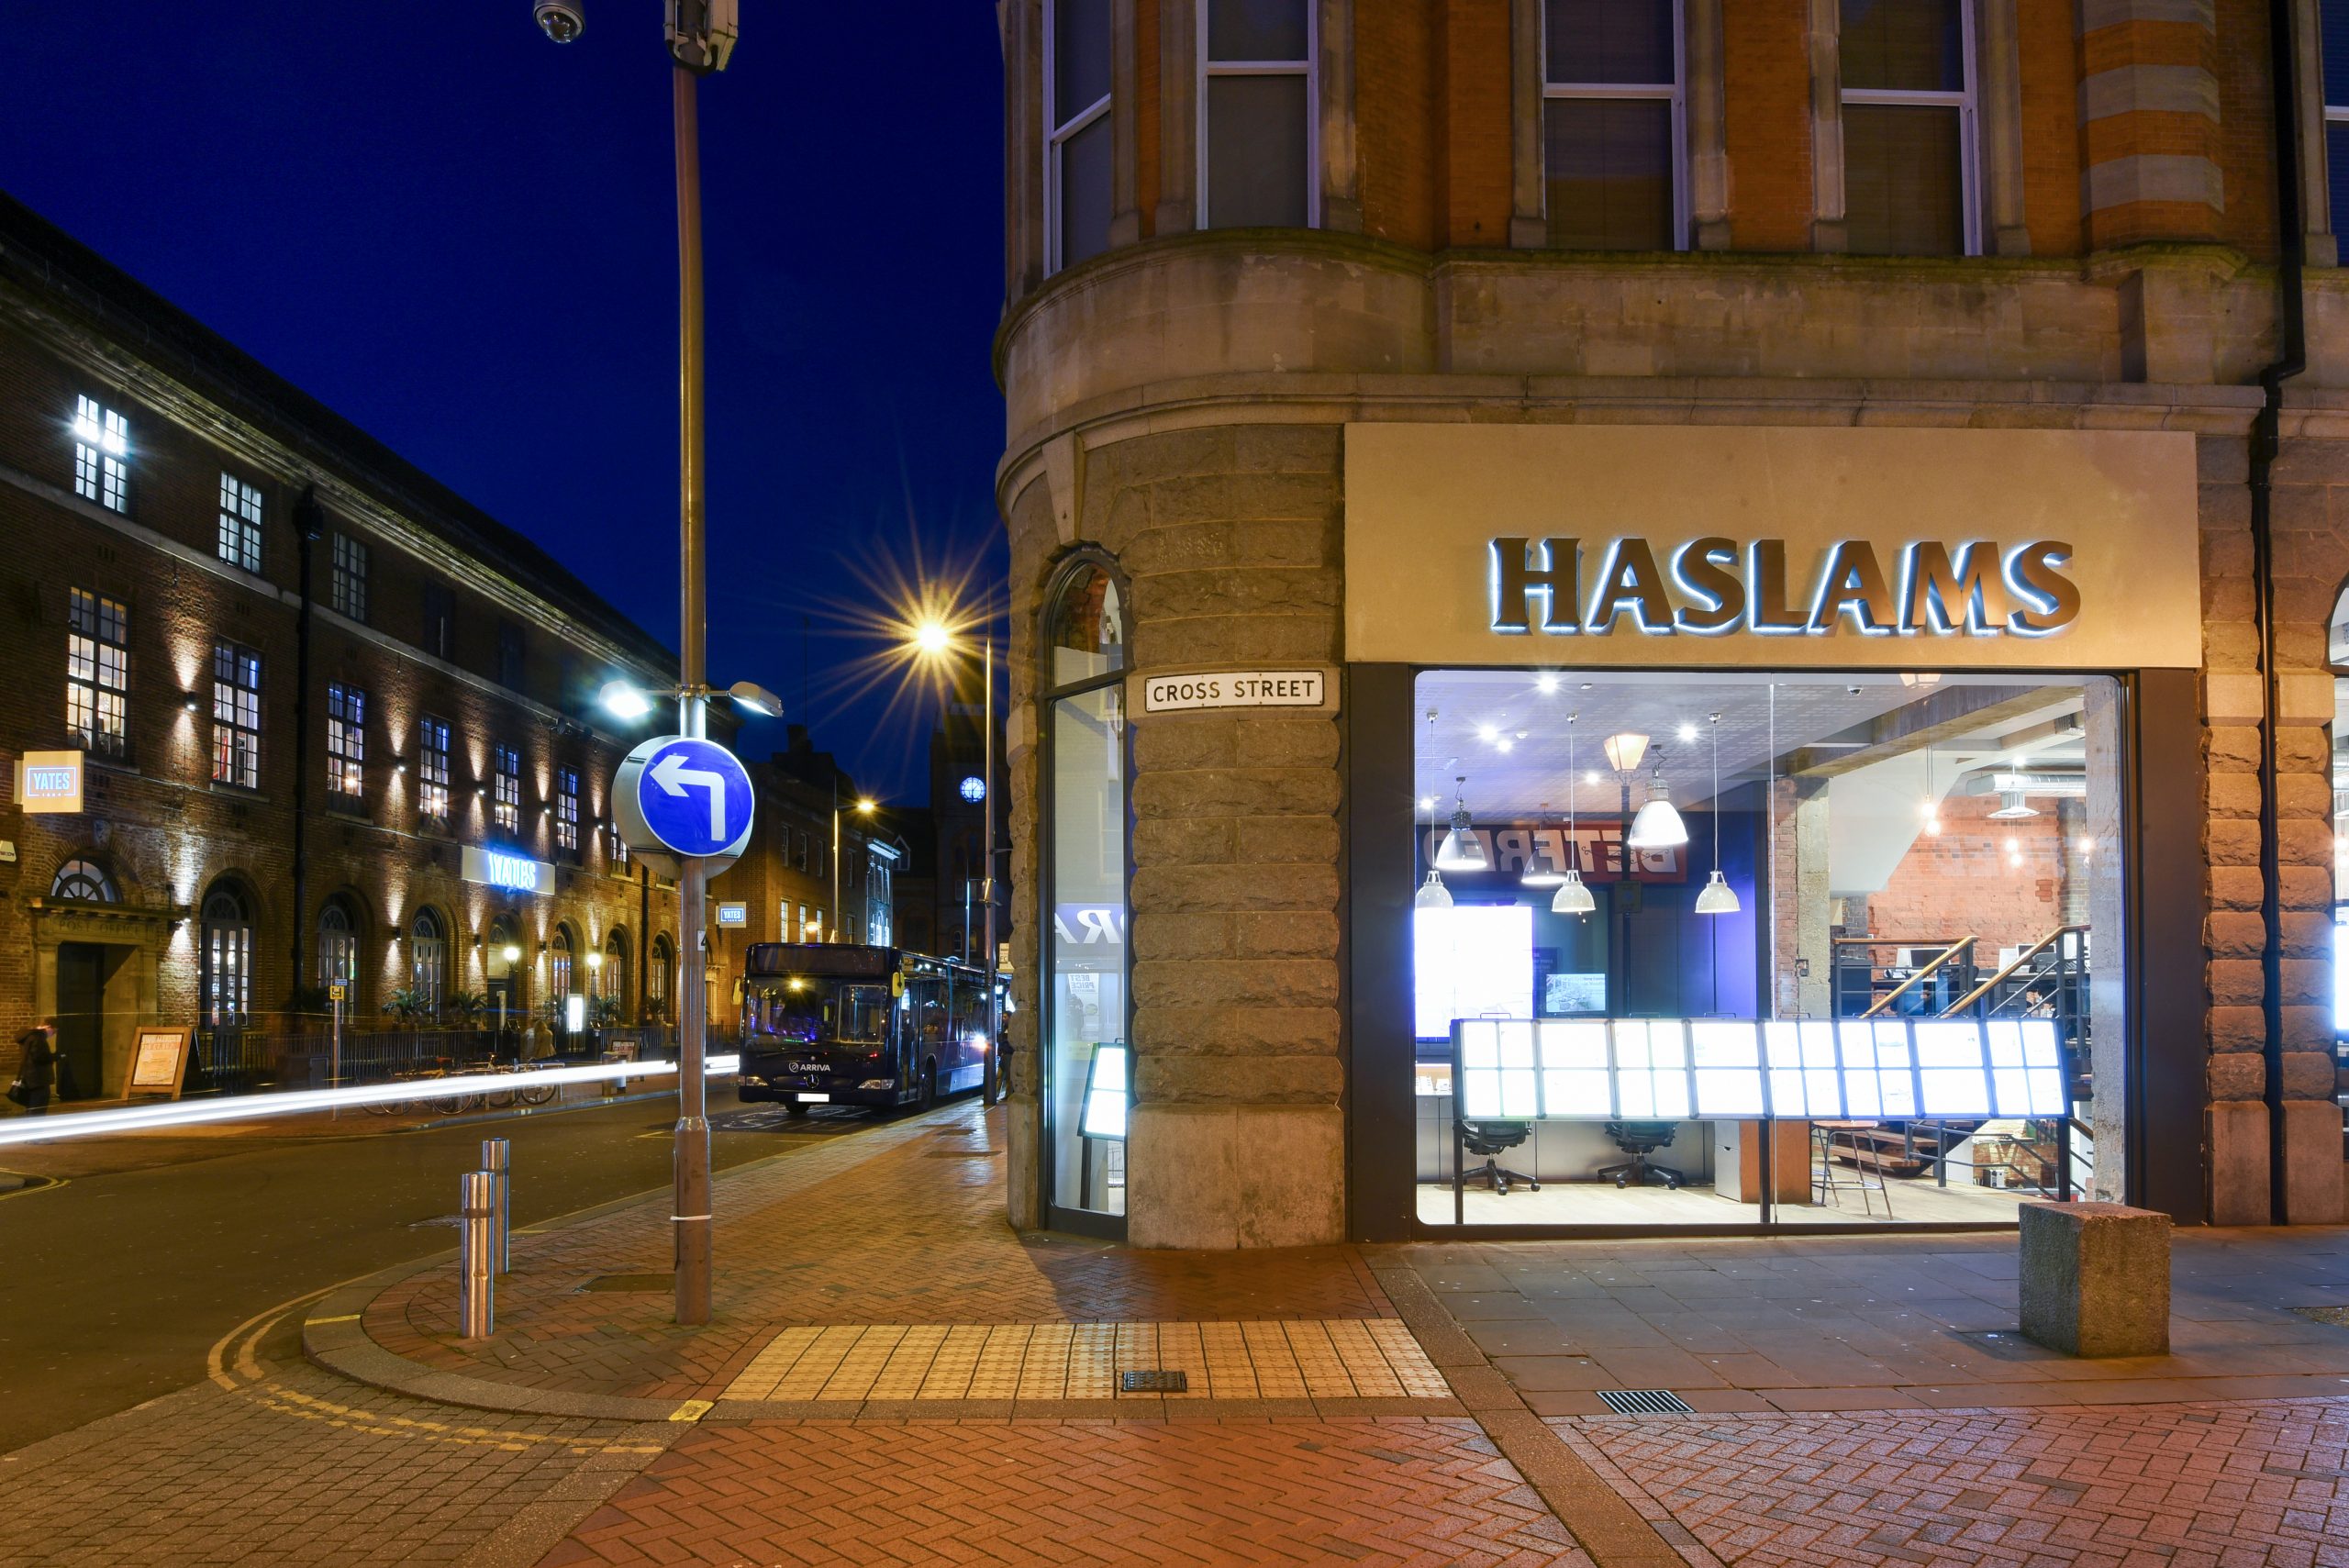 Haslams estate agents office in Reading